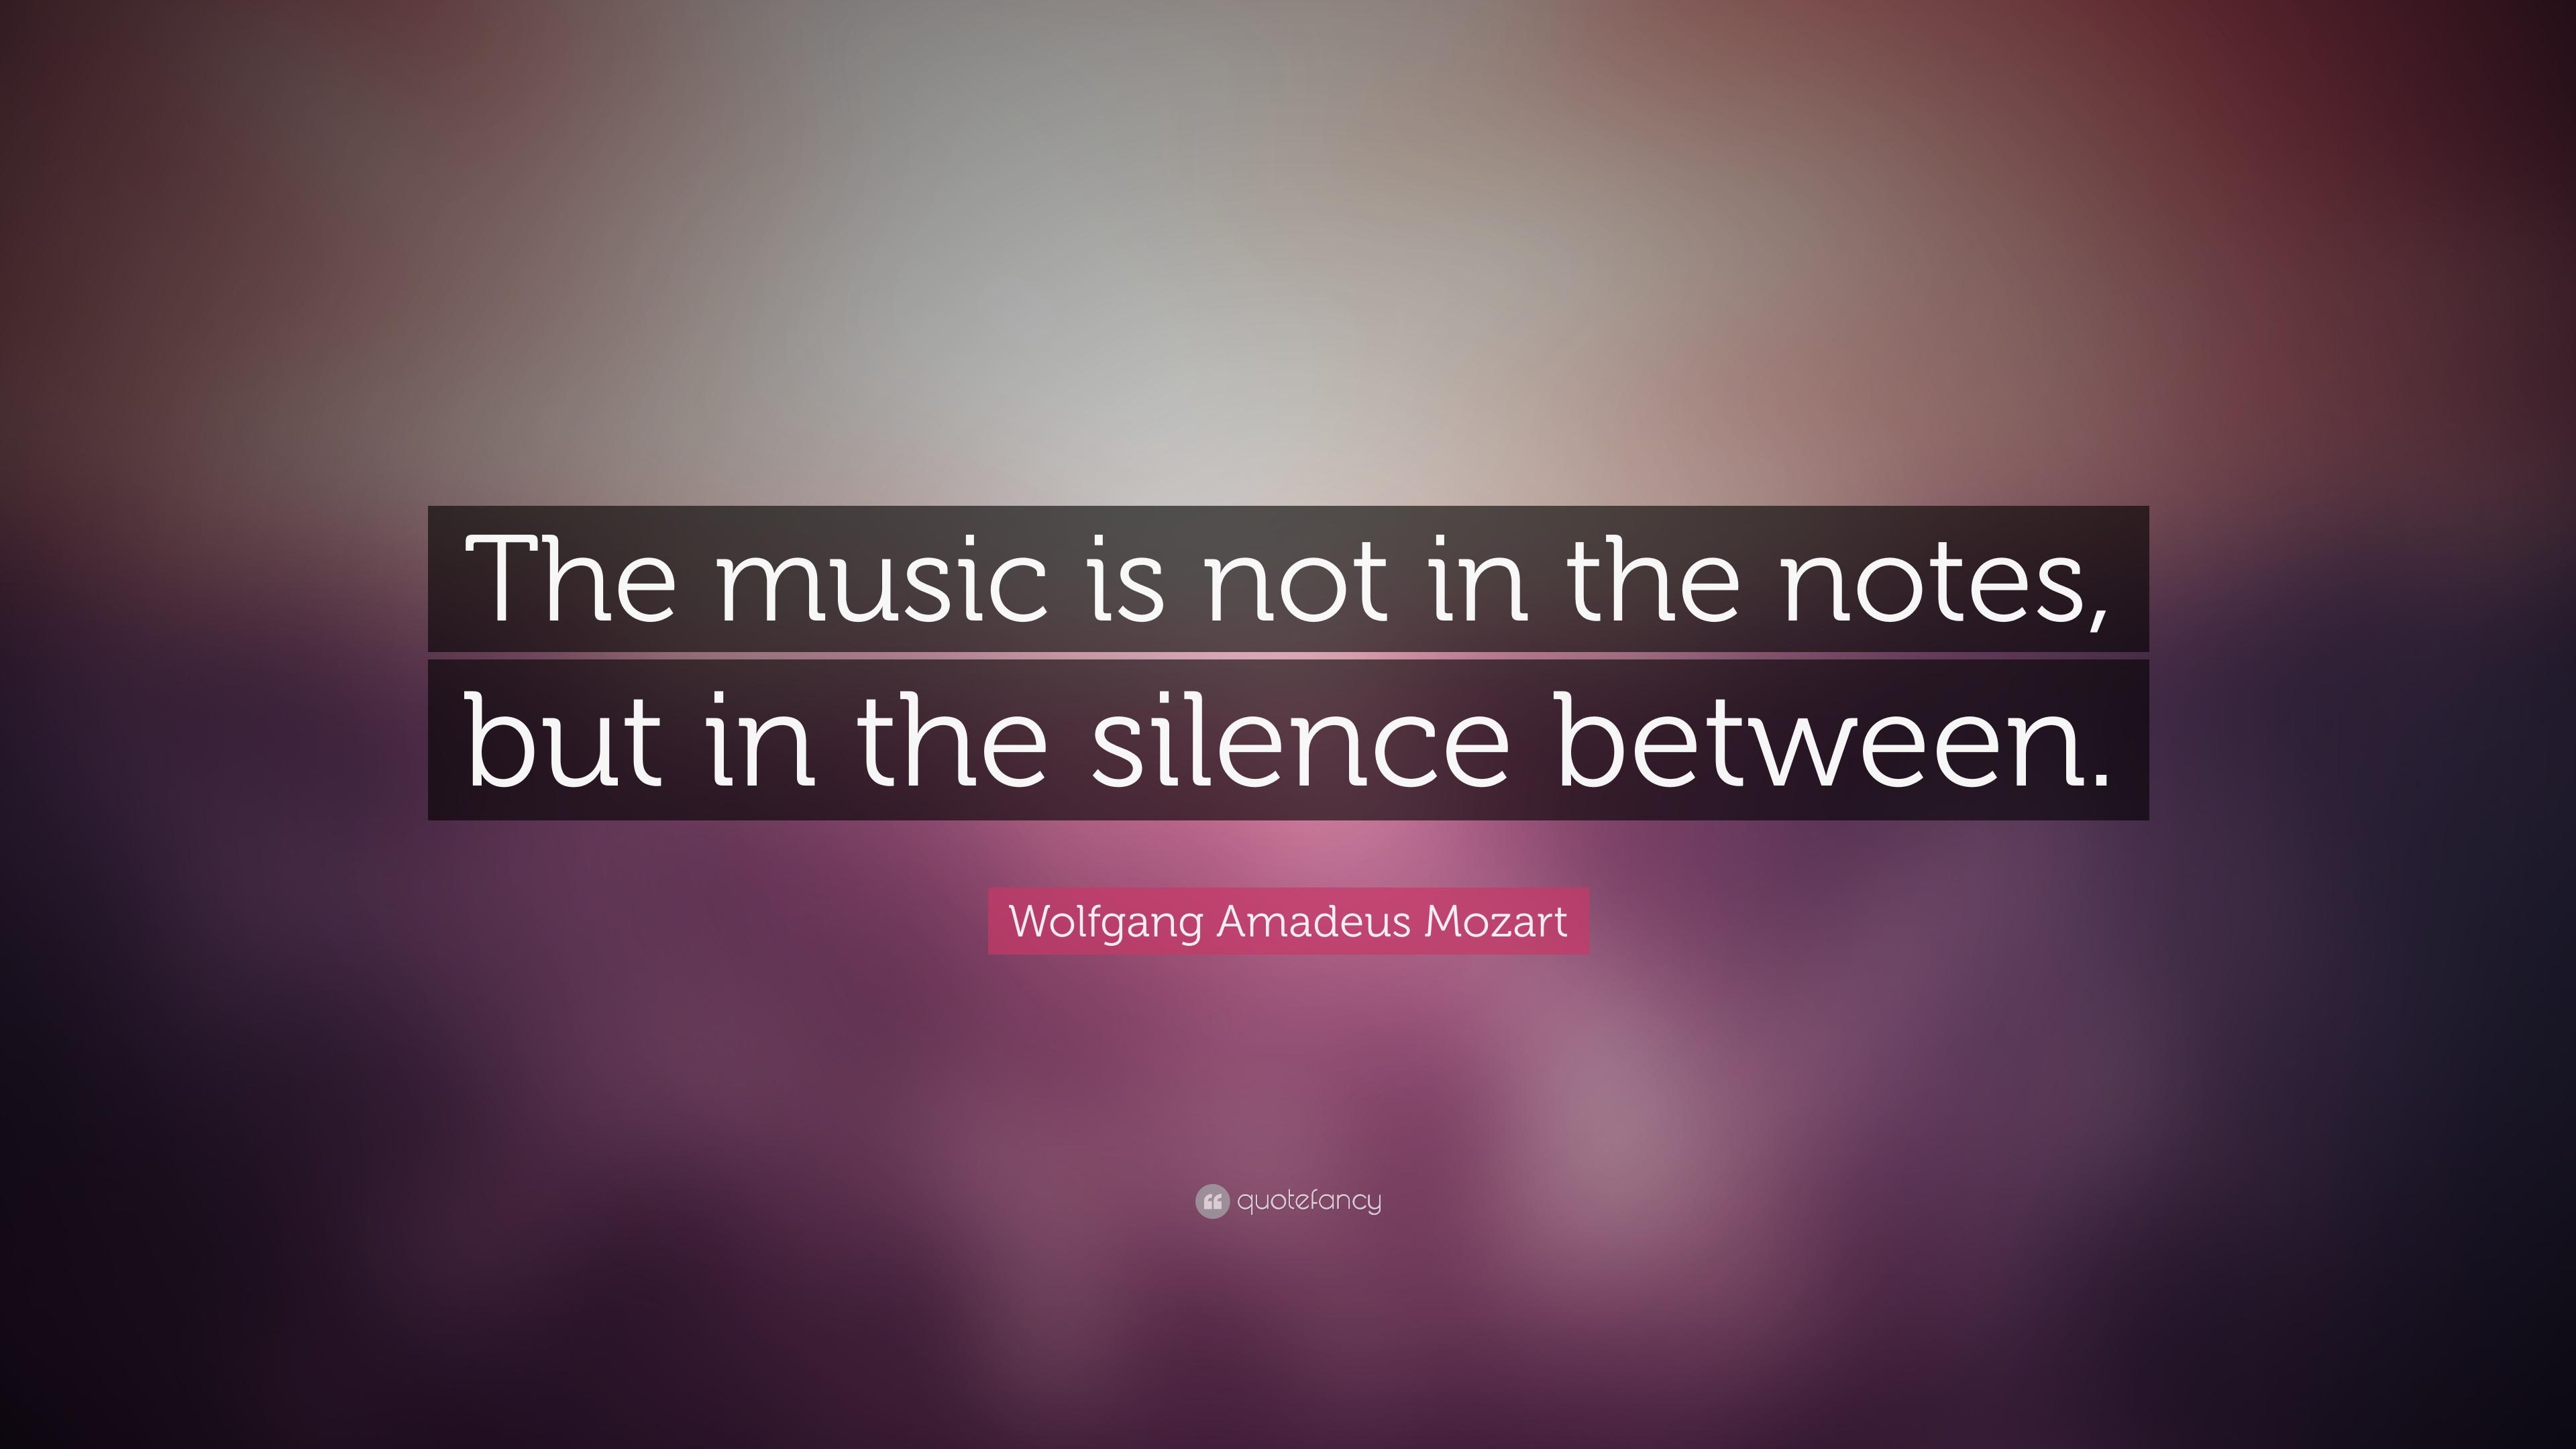 Wolfgang Amadeus Mozart Quote: “The music is not in